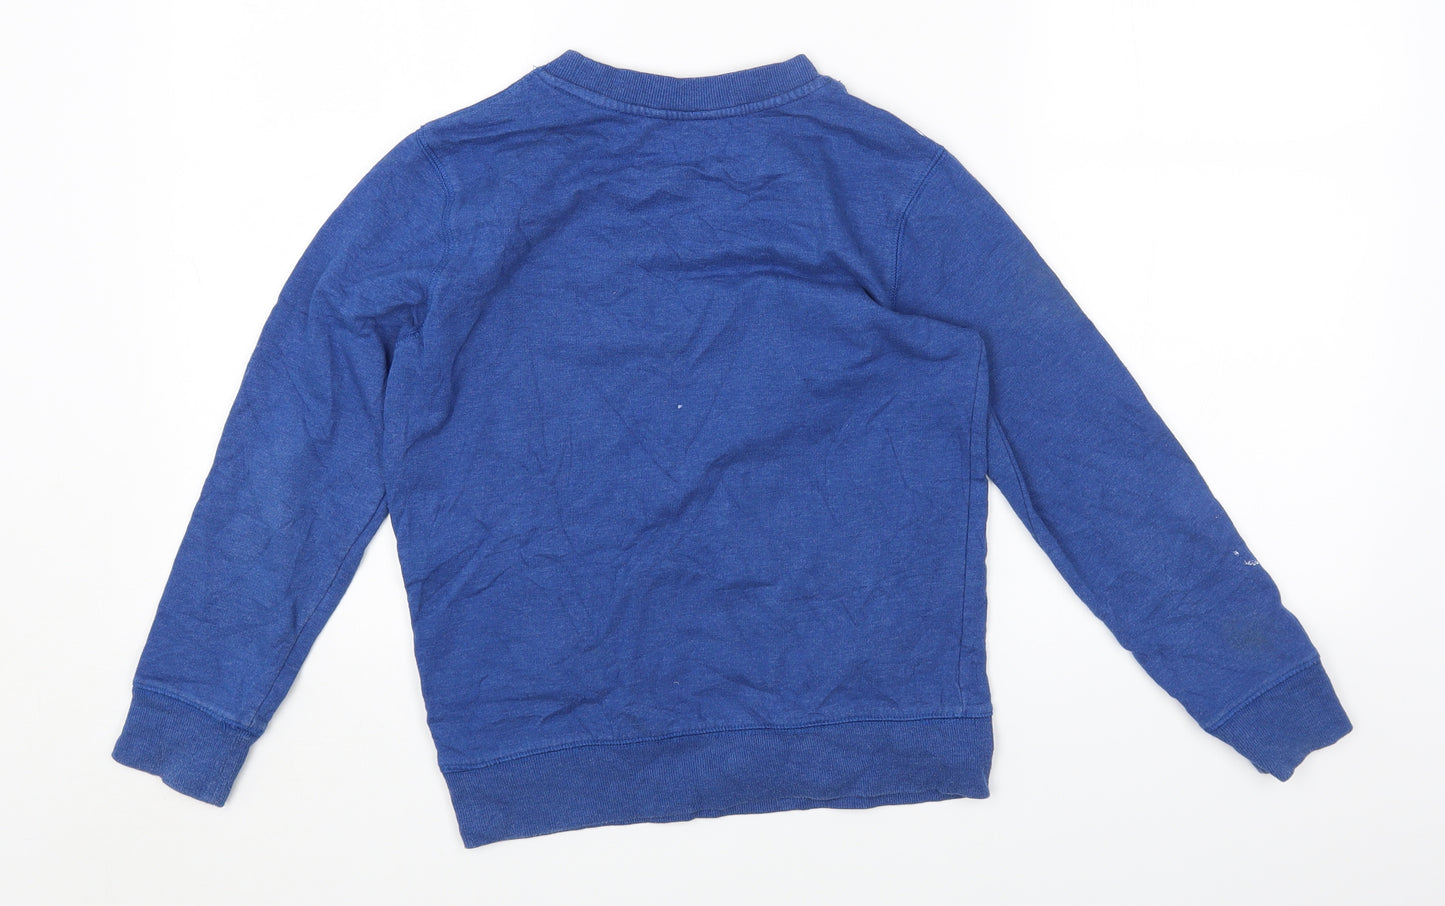 George Boys Blue Round Neck Cotton Pullover Jumper Size 9-10 Years Pullover - USA Brooklyn Williamsburg 1971